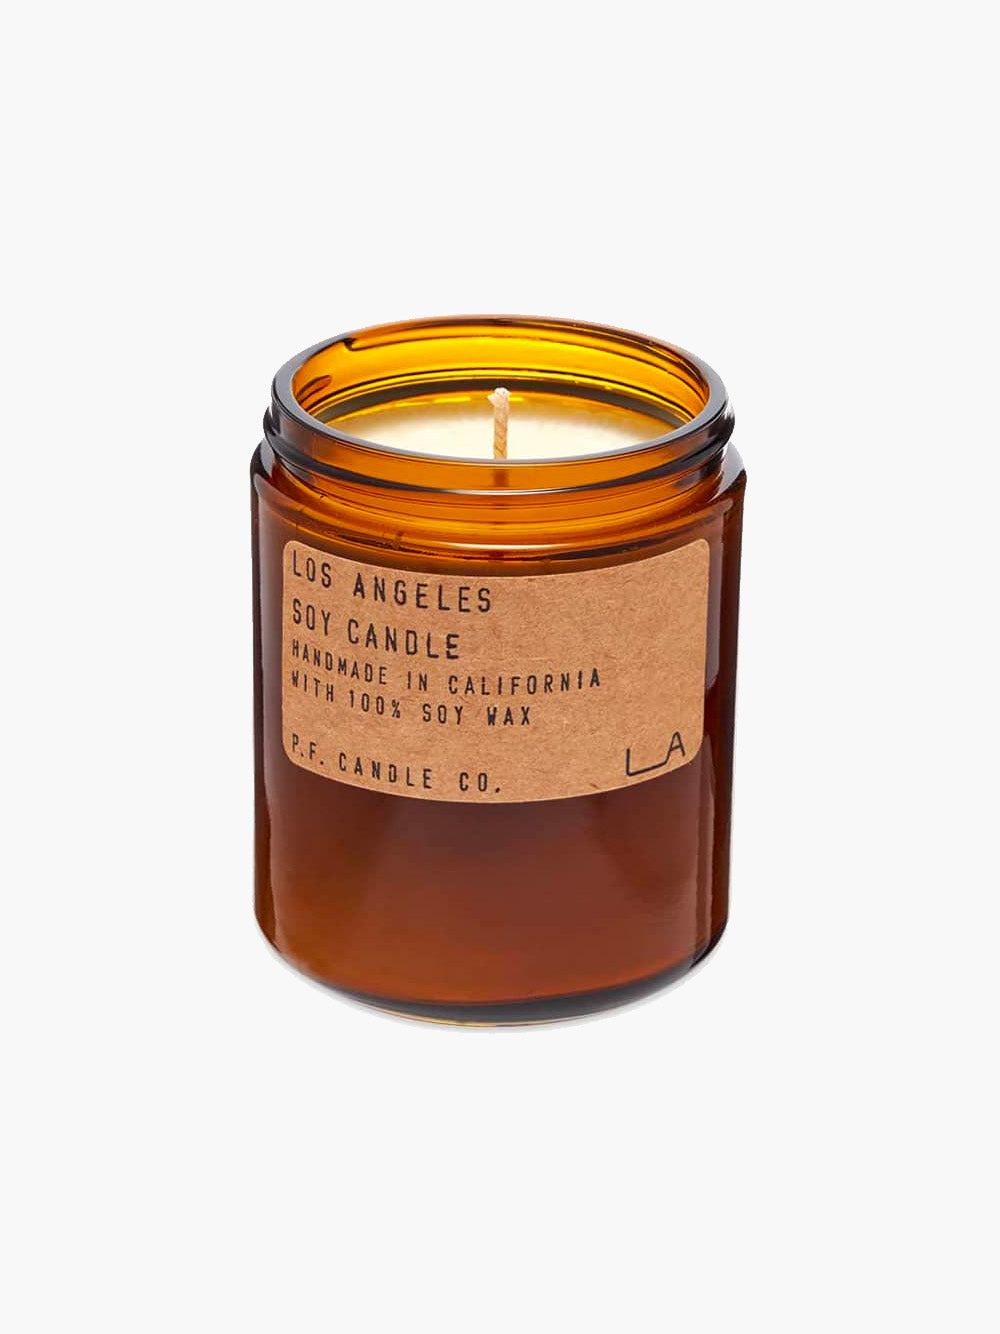 P.F. Candle Co. 204g Soy Candle - Los Angeles (Limited Edition)